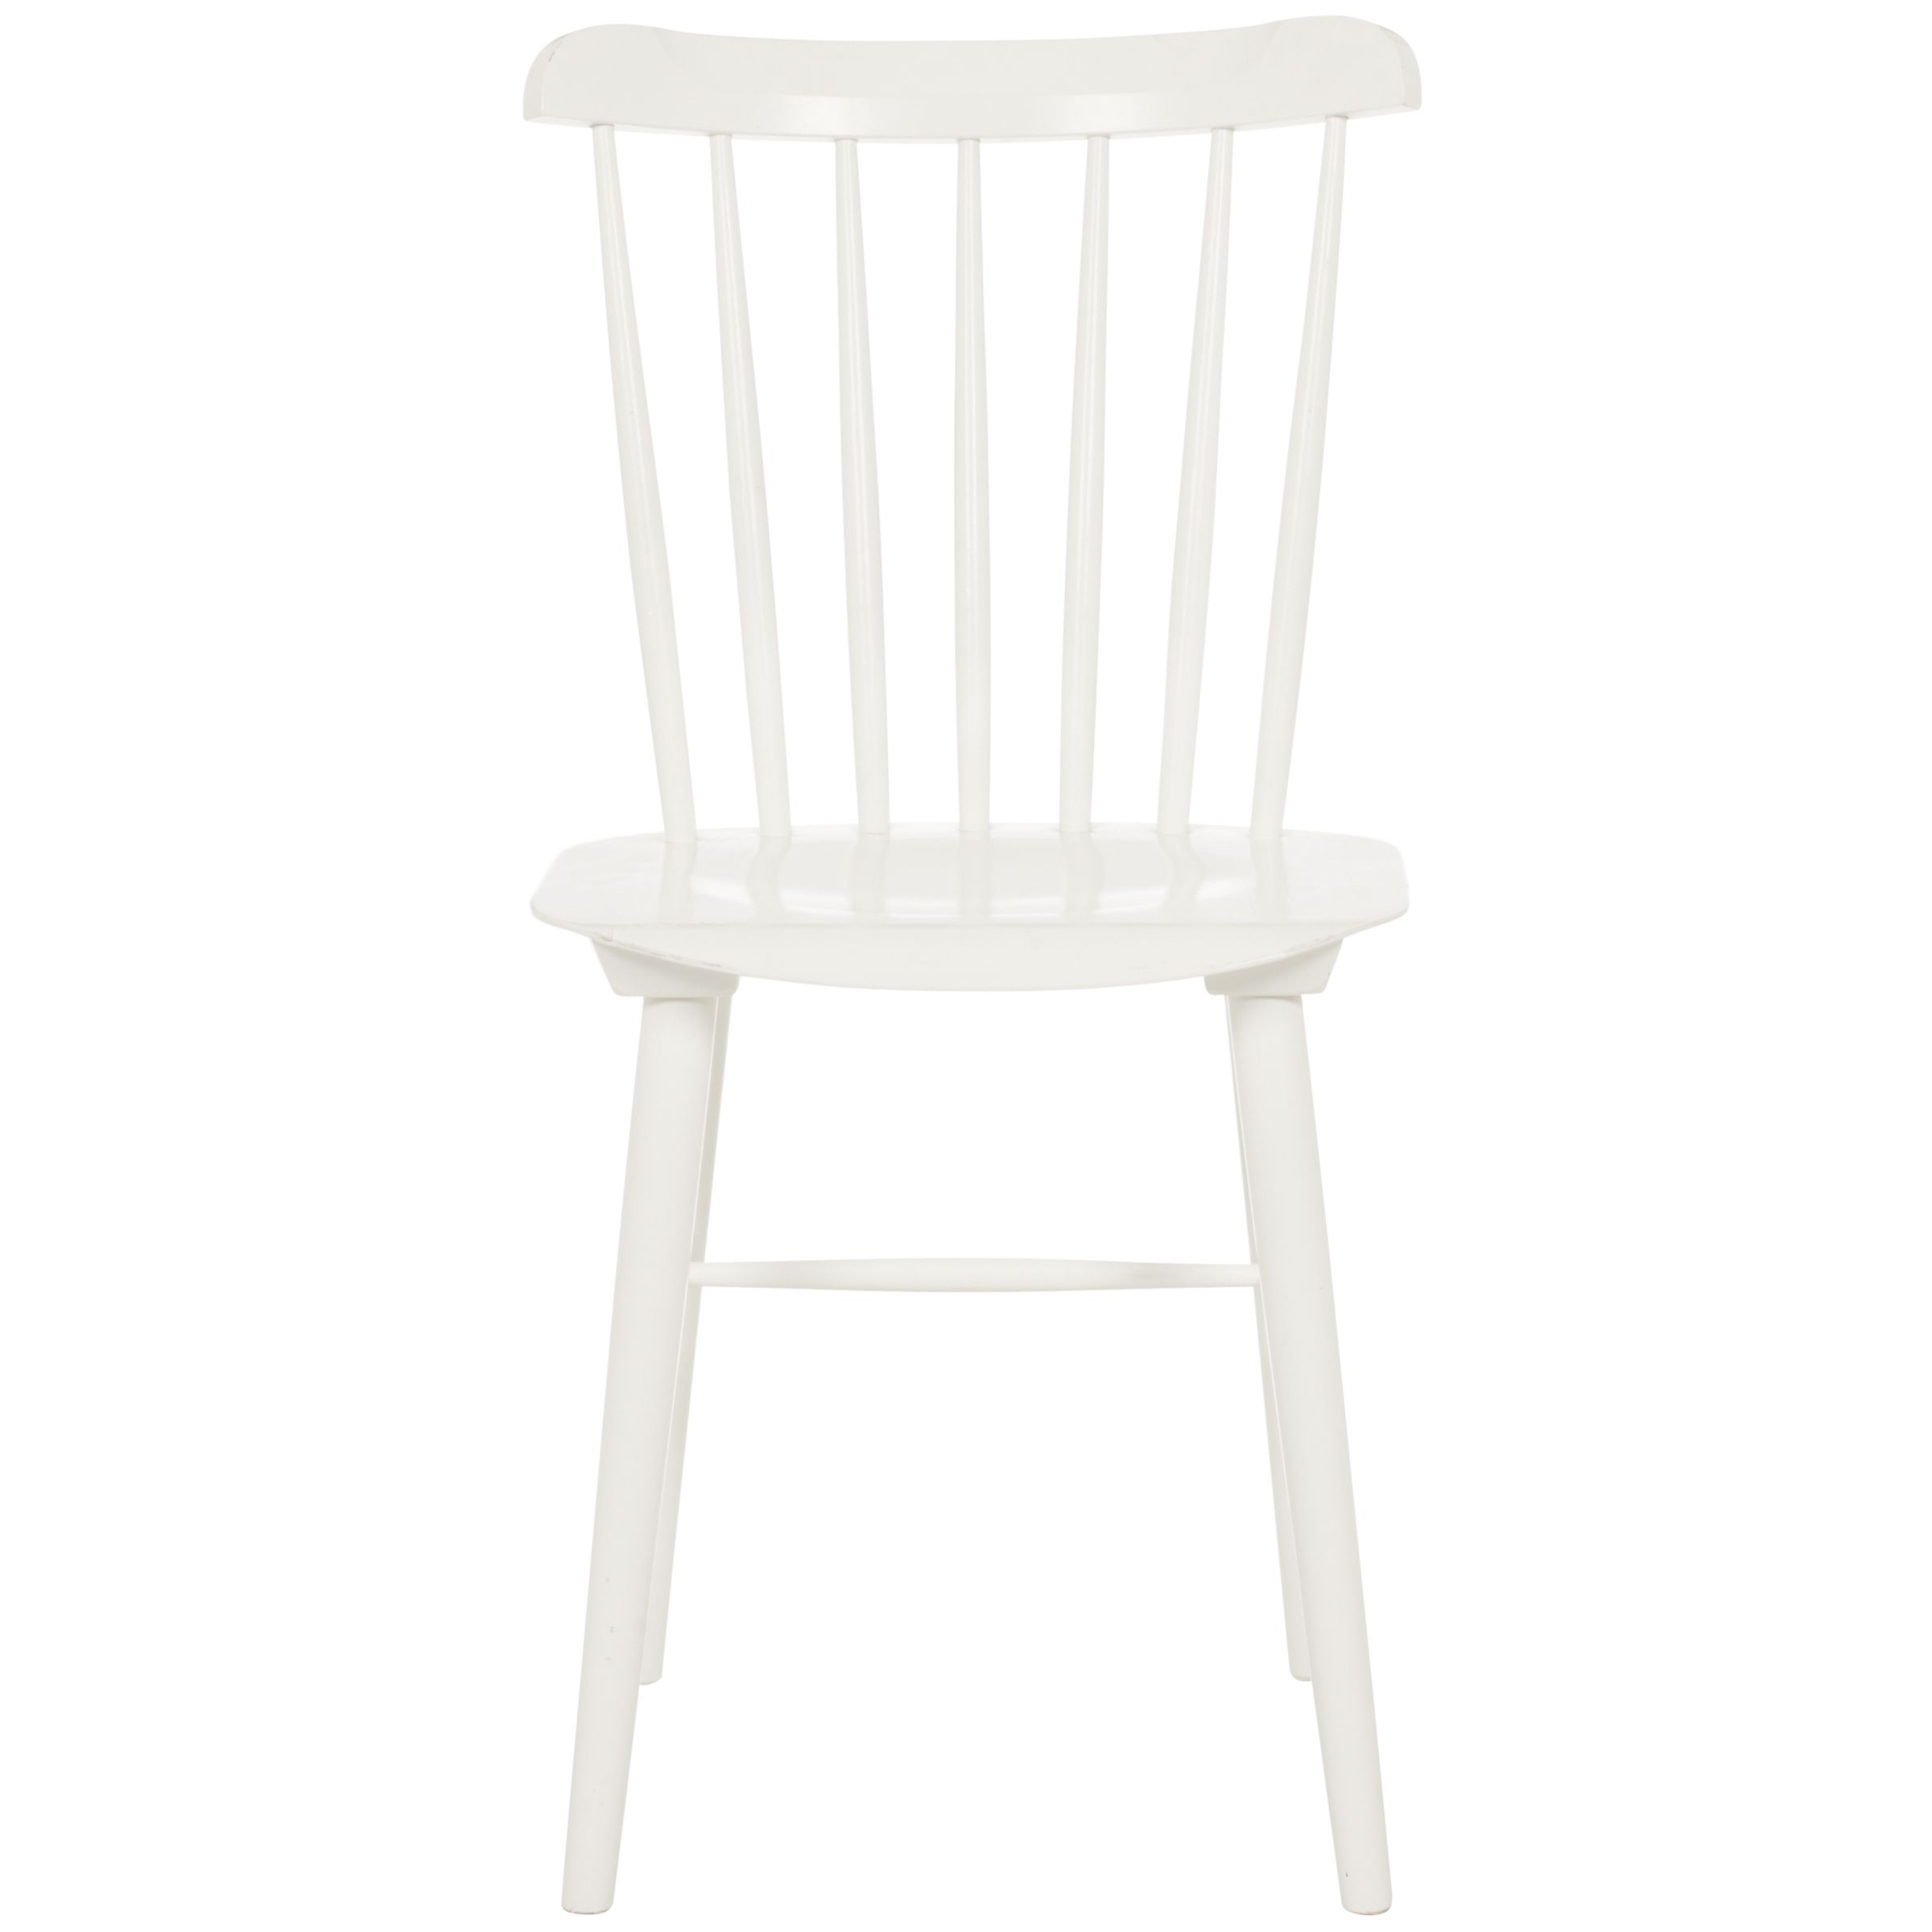 John Lewis Spindle Dining Chair, White